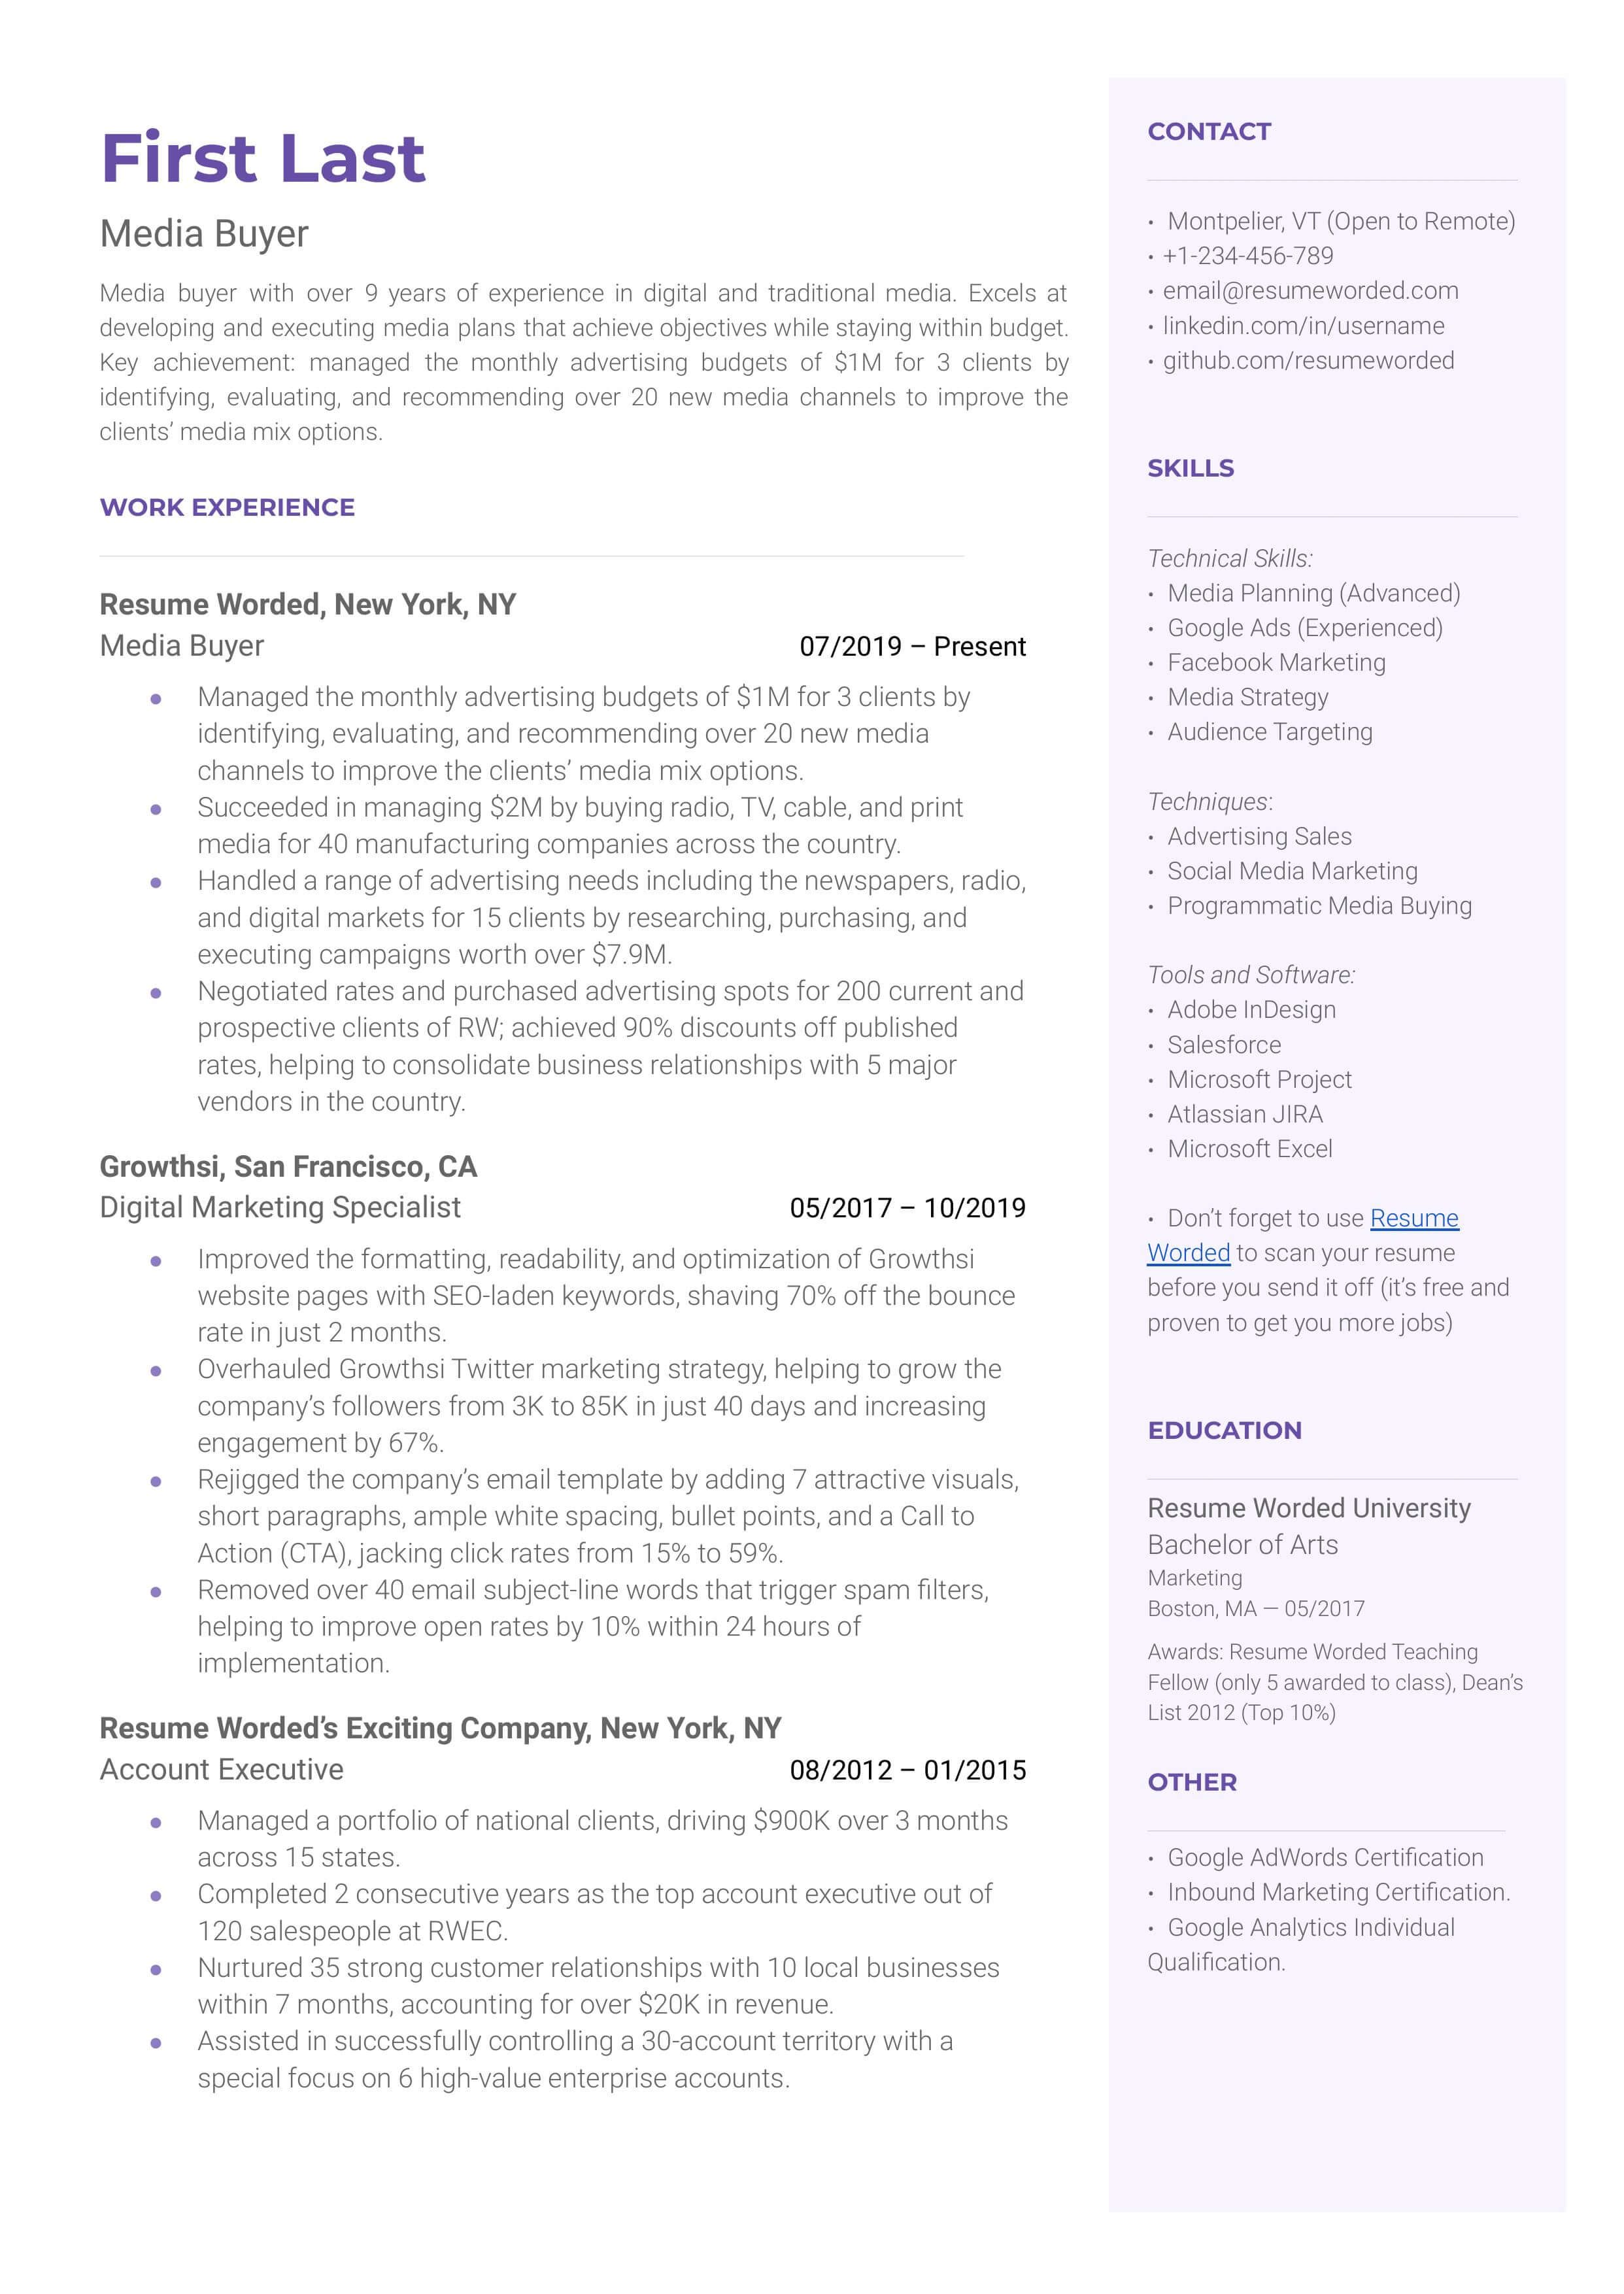 A media buyer resume template that includes strong action verbs